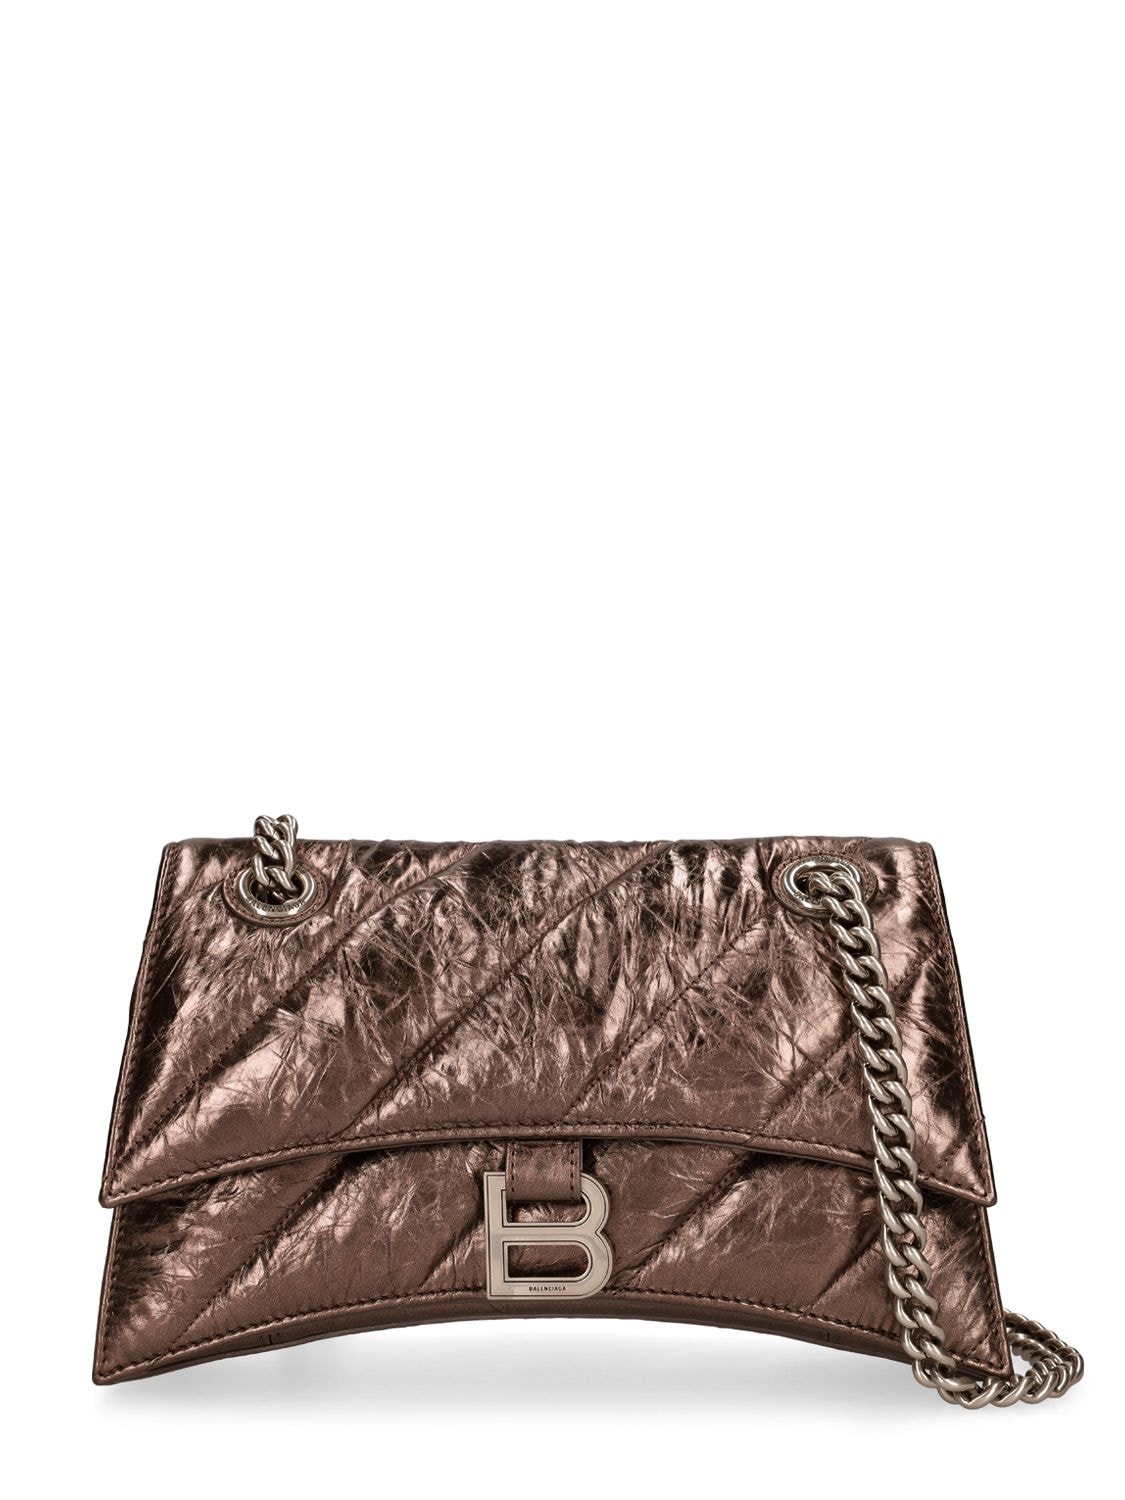 Balenciaga Small Crush Chain Quilted Leather Bag In Dark Bronze